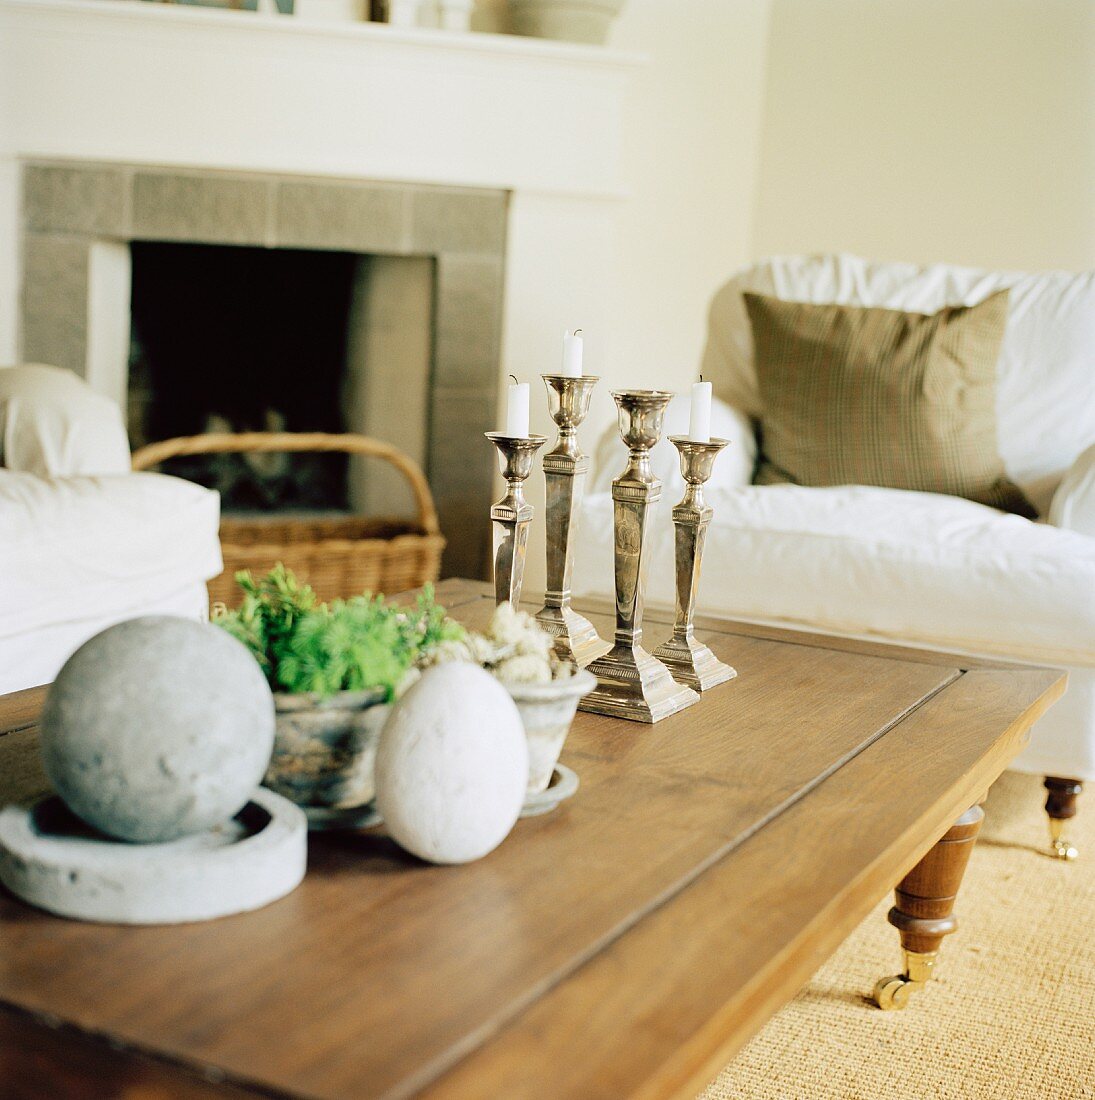 Stone ornaments & candlesticks on coffee table